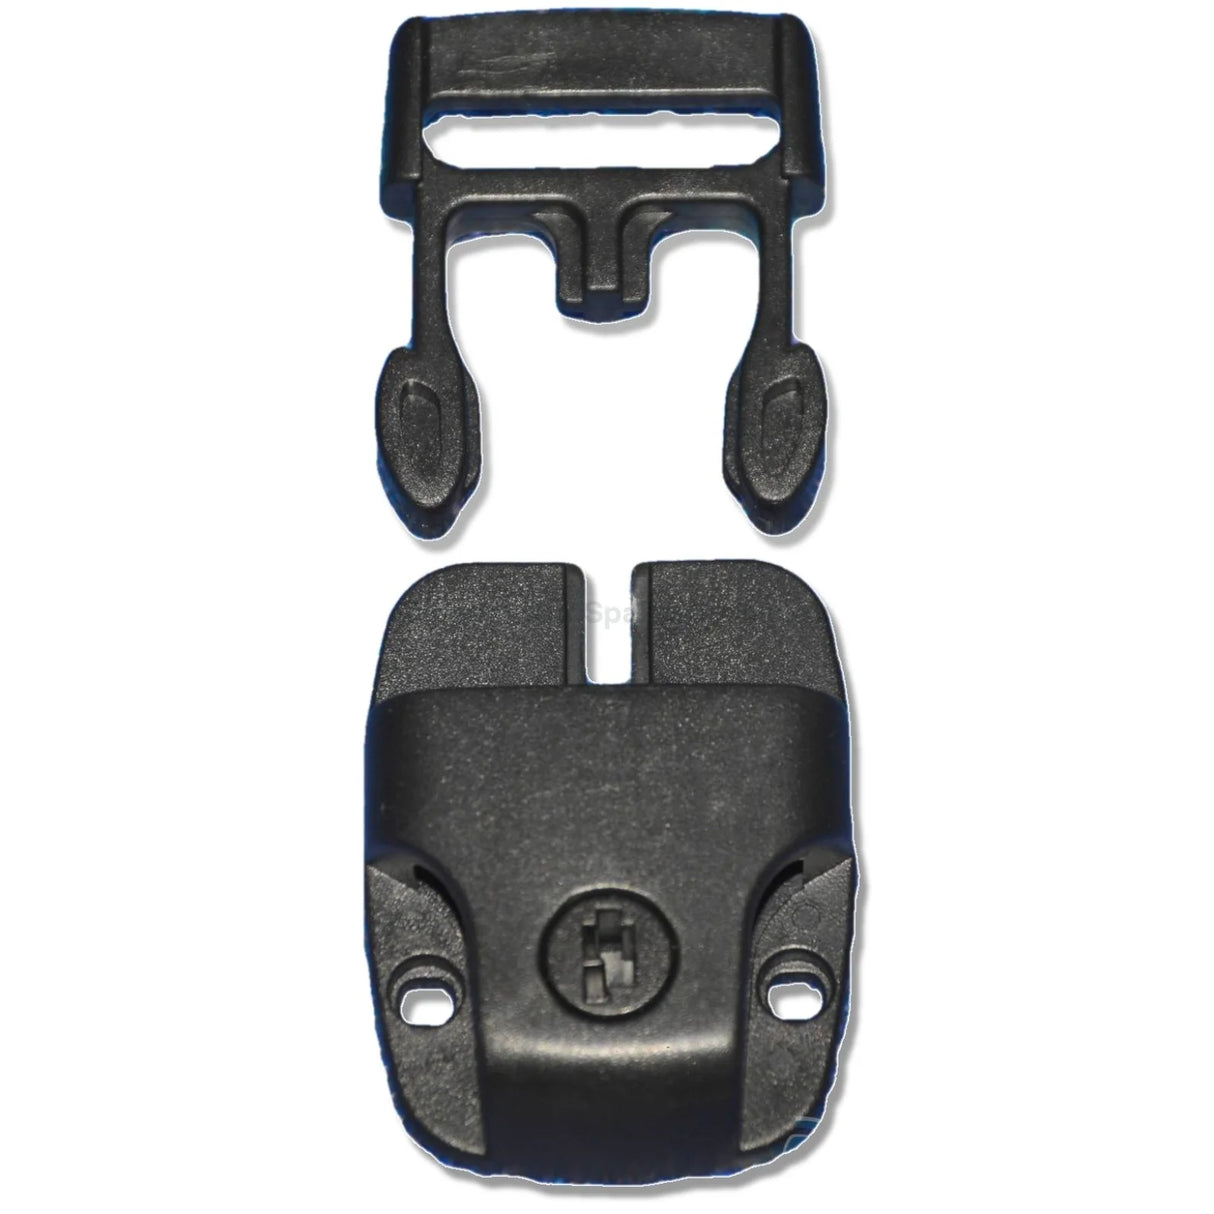 Spa Cover Locks & Parts - Buckles, Keys, Clips - Heater and Spa Parts